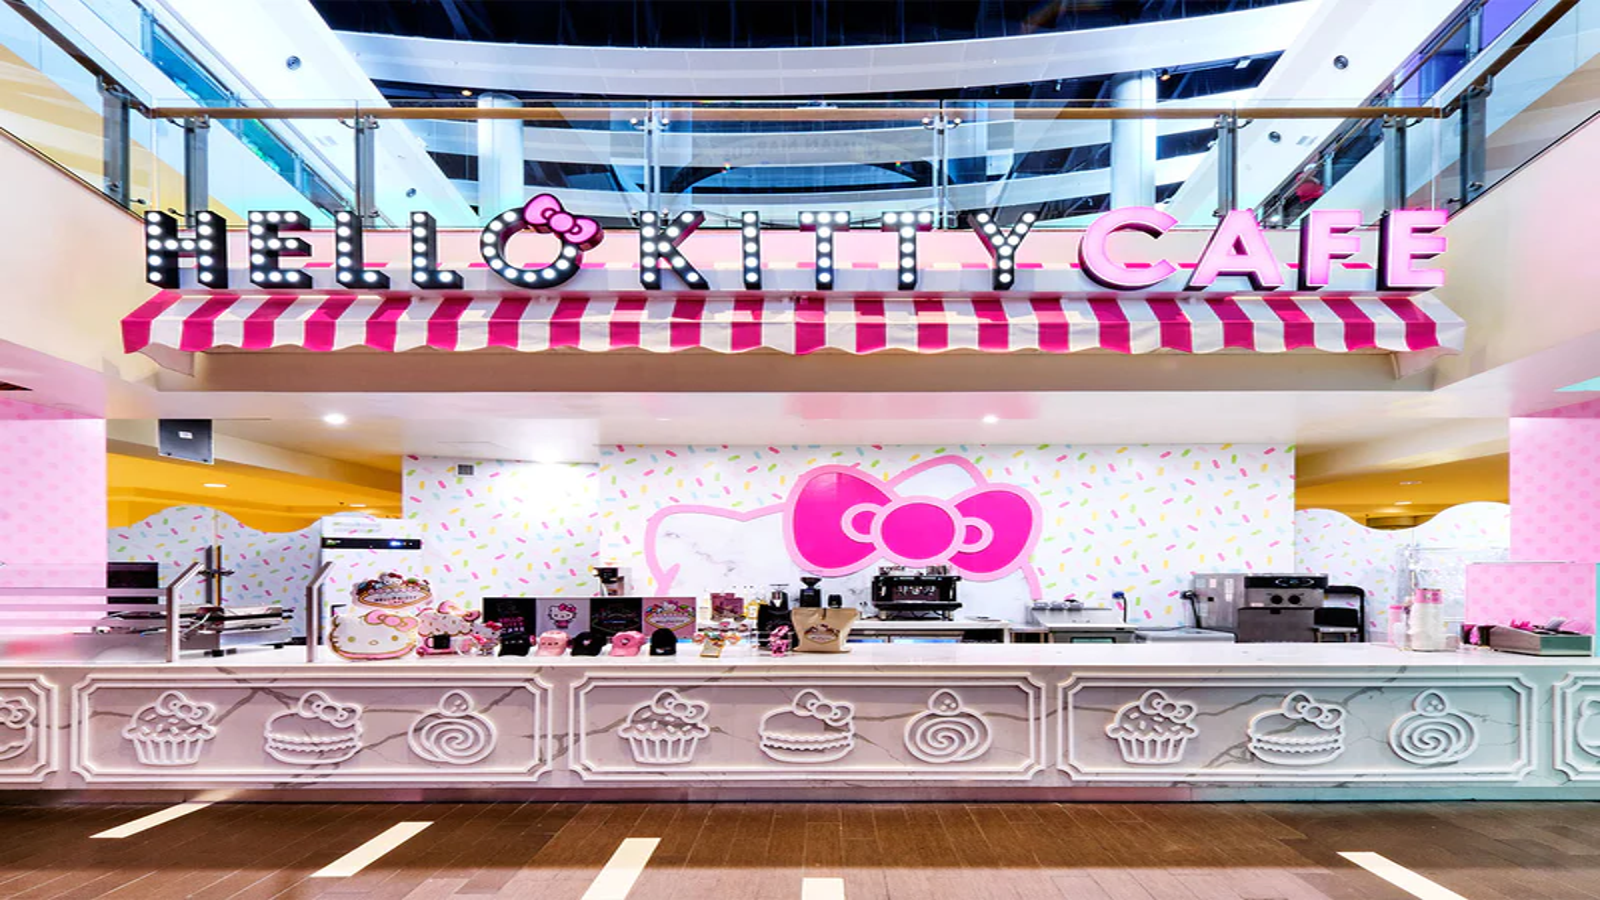 Hello Kitty Opens a Pretty Pink Cafe, Tea Room, and Cocktail